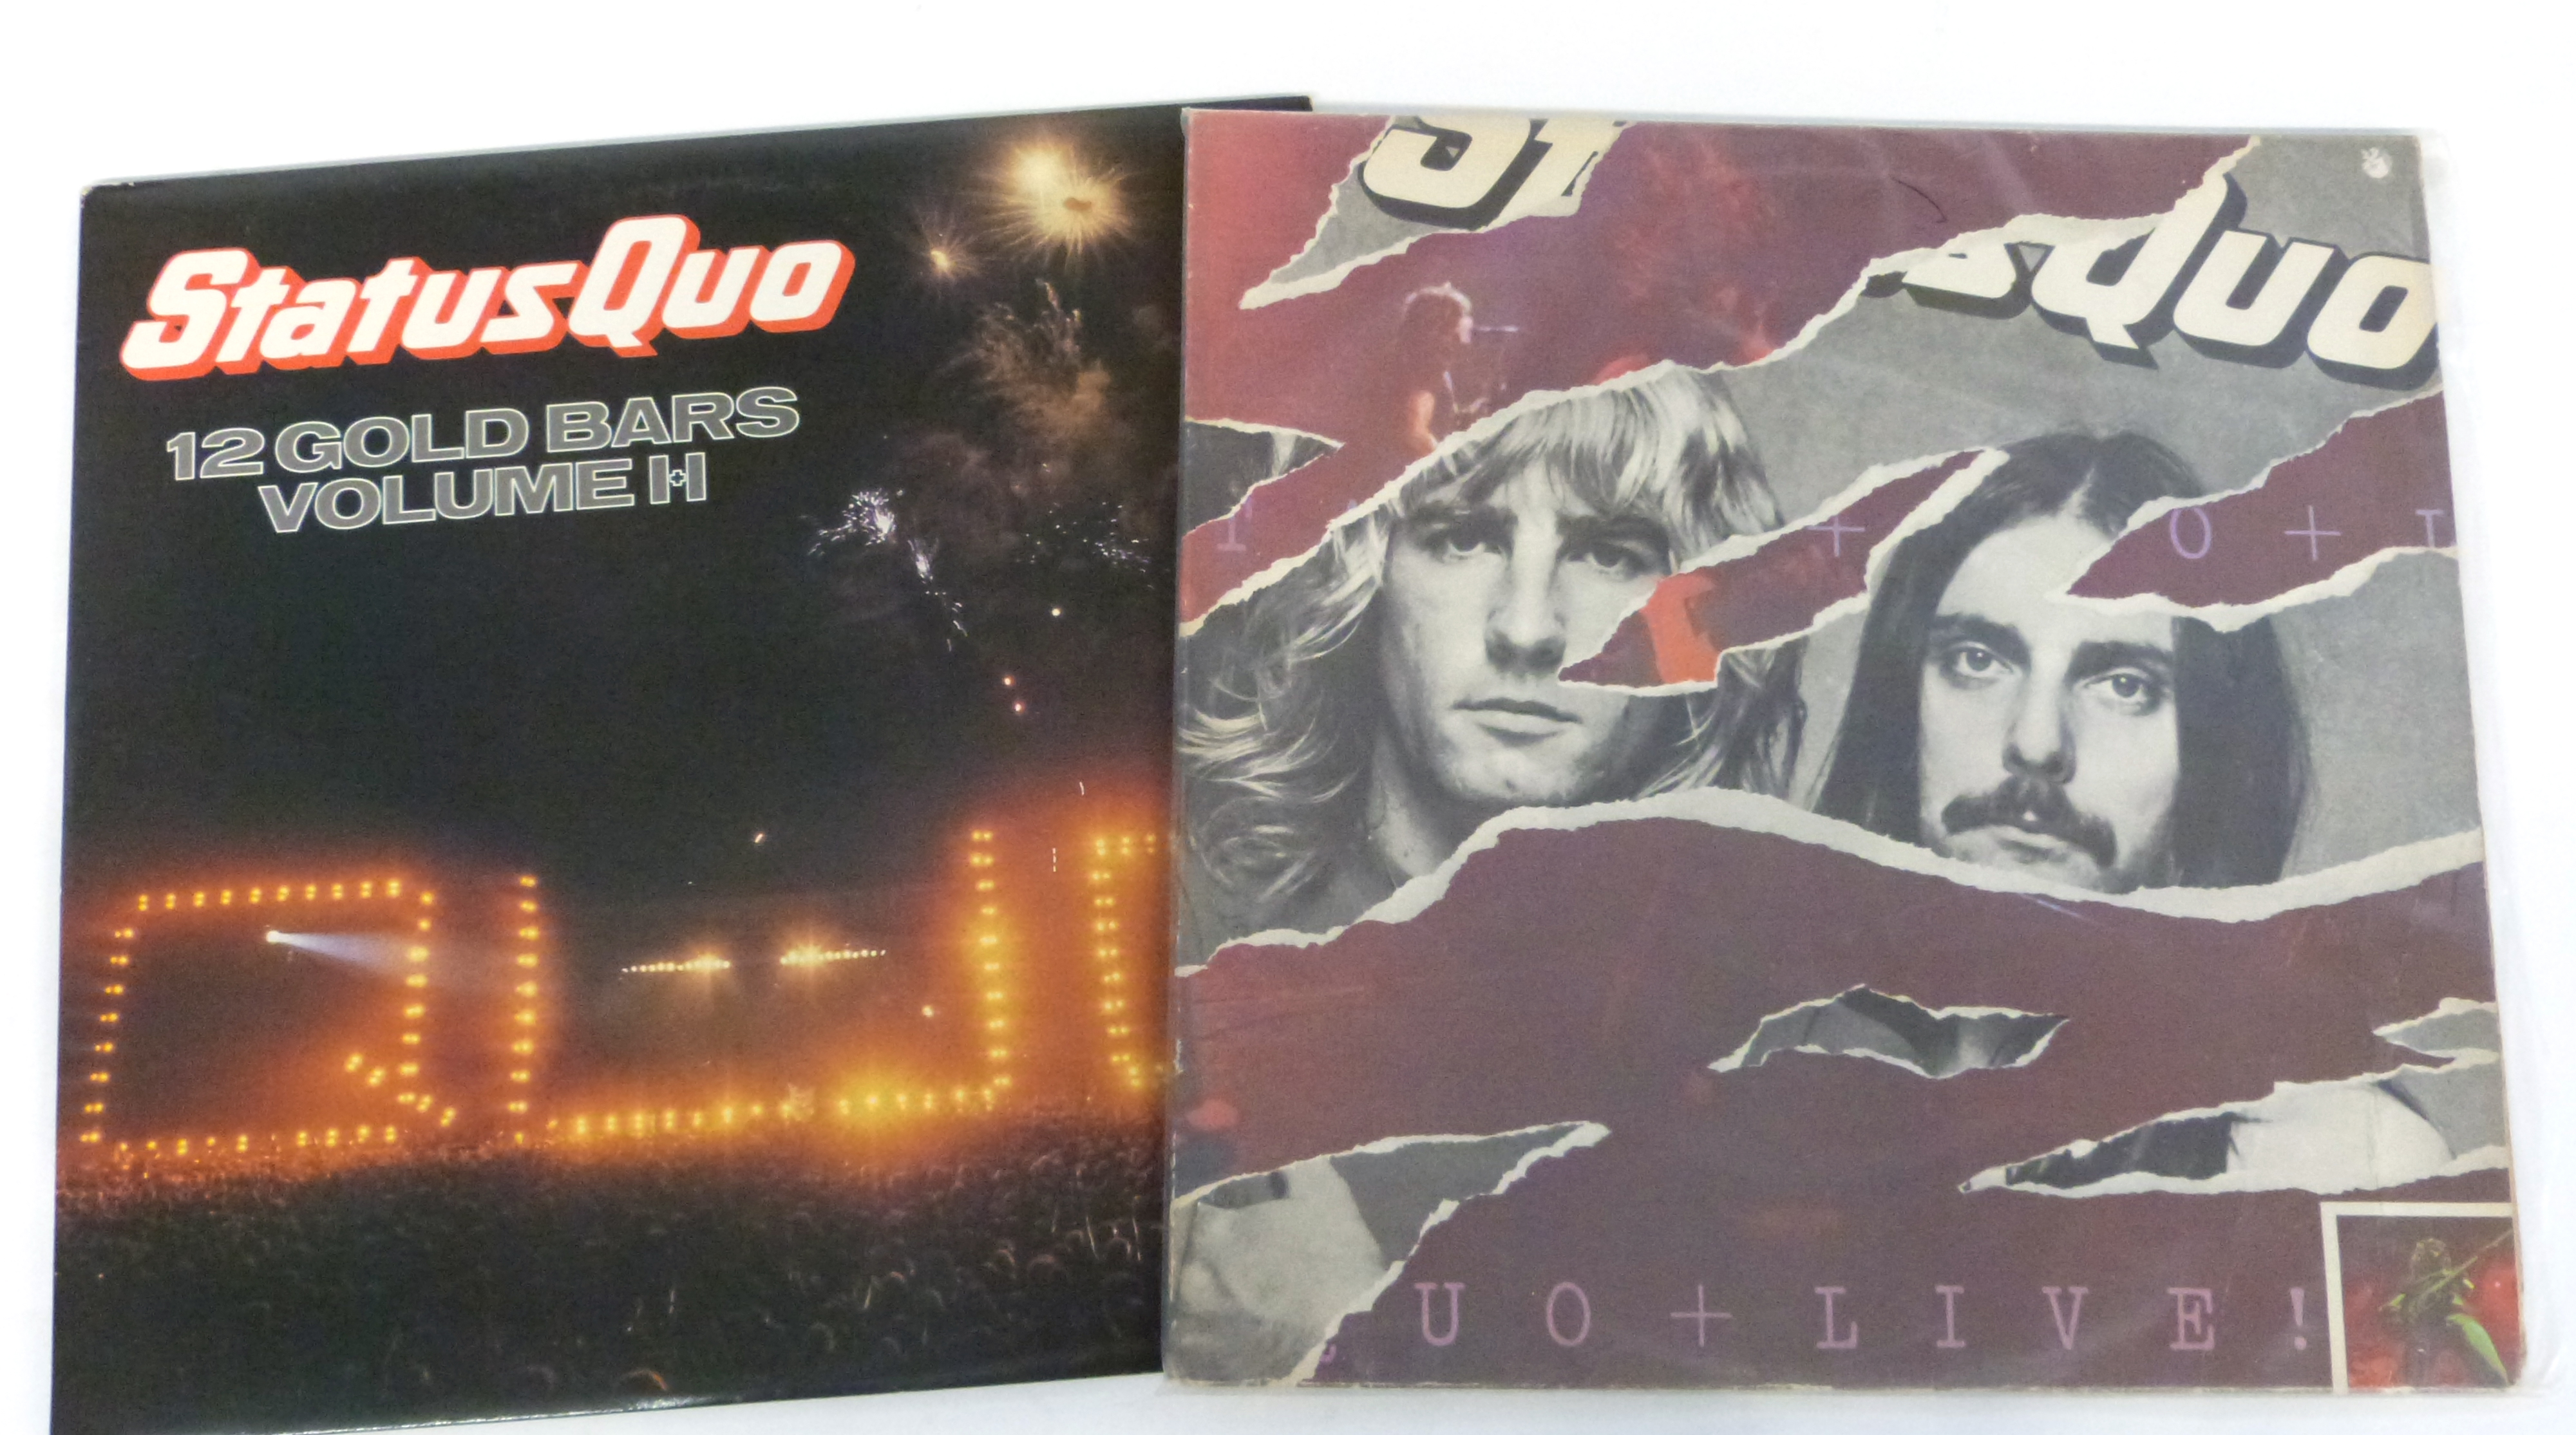 Status Quo Live double LP and Gold Bars double LP. VG+